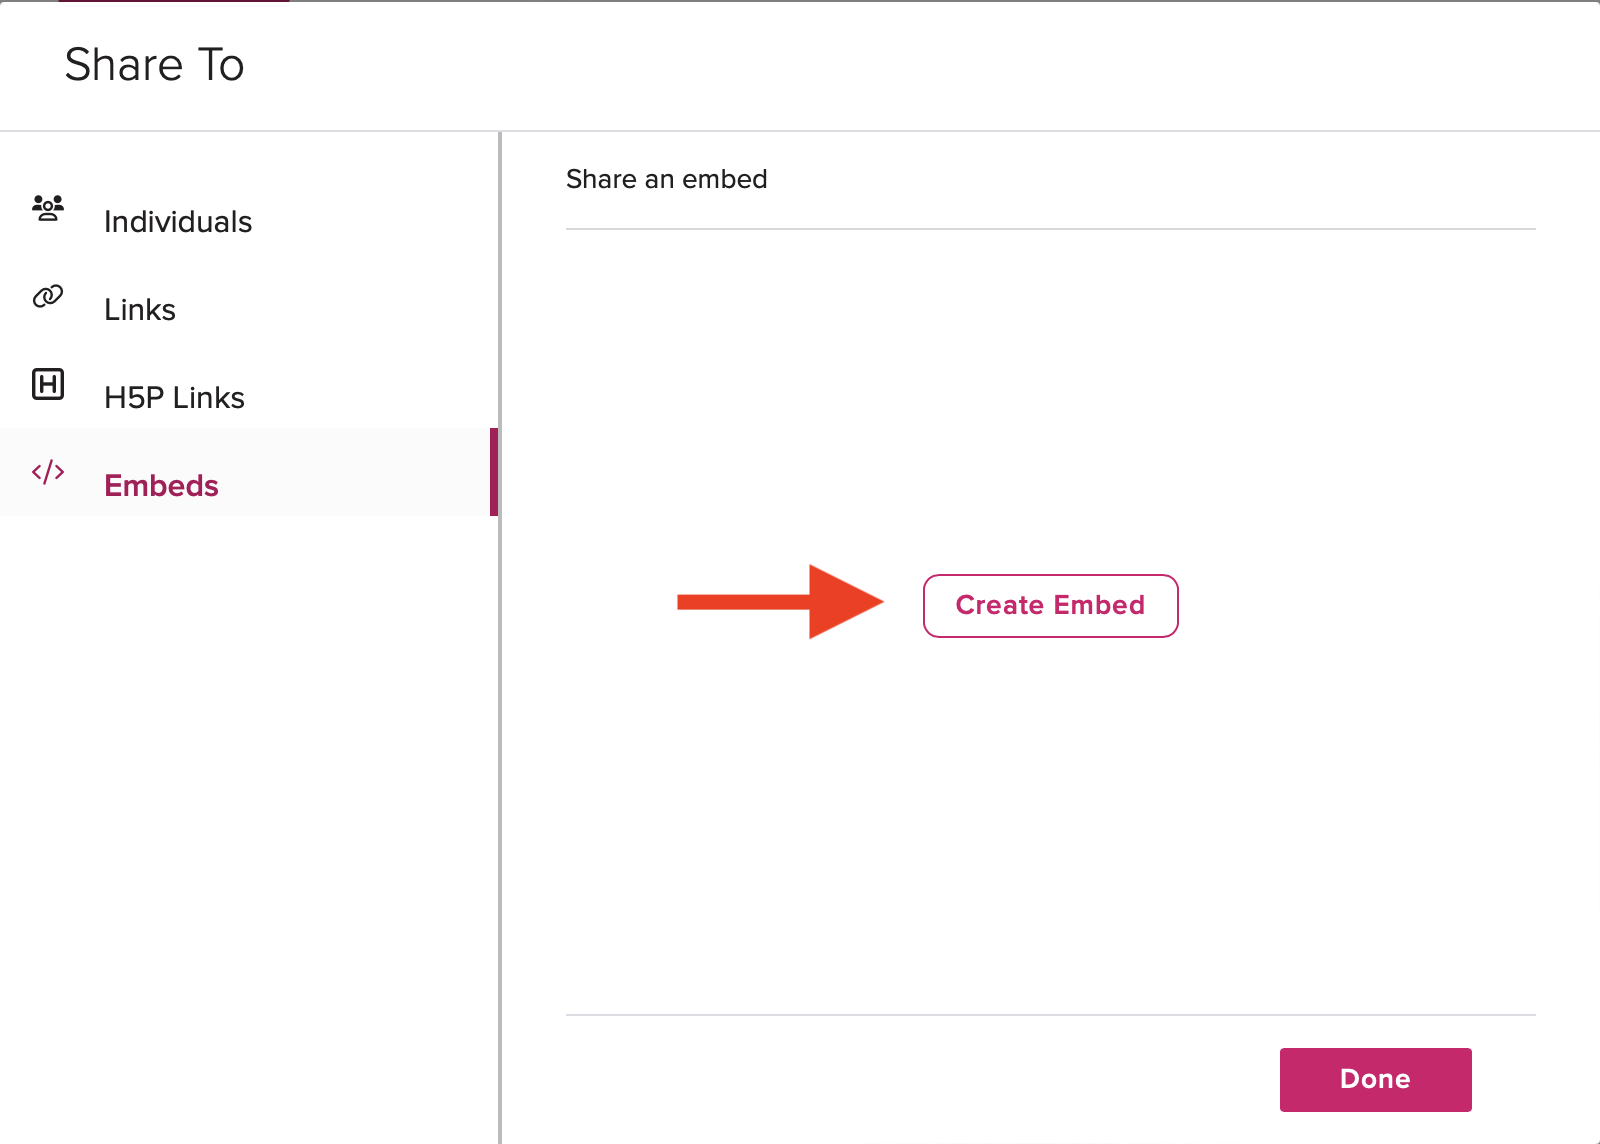 Share settings modal with Embeds tab shown and the Create Embed button identified for selection as described